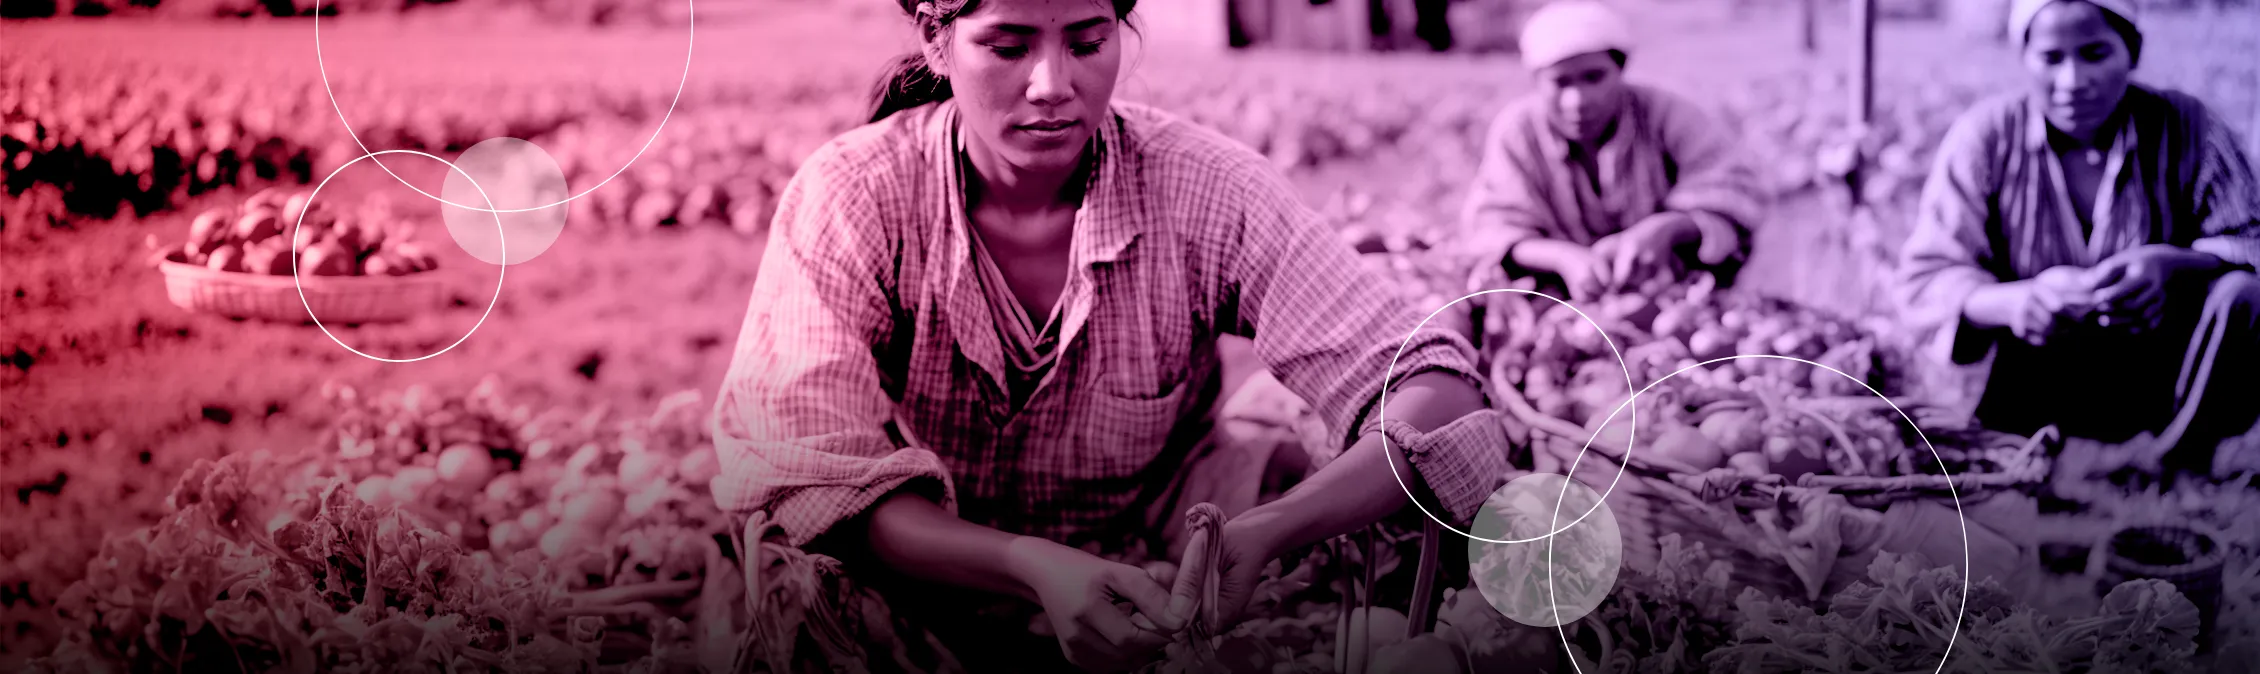 woman working on agricultural field